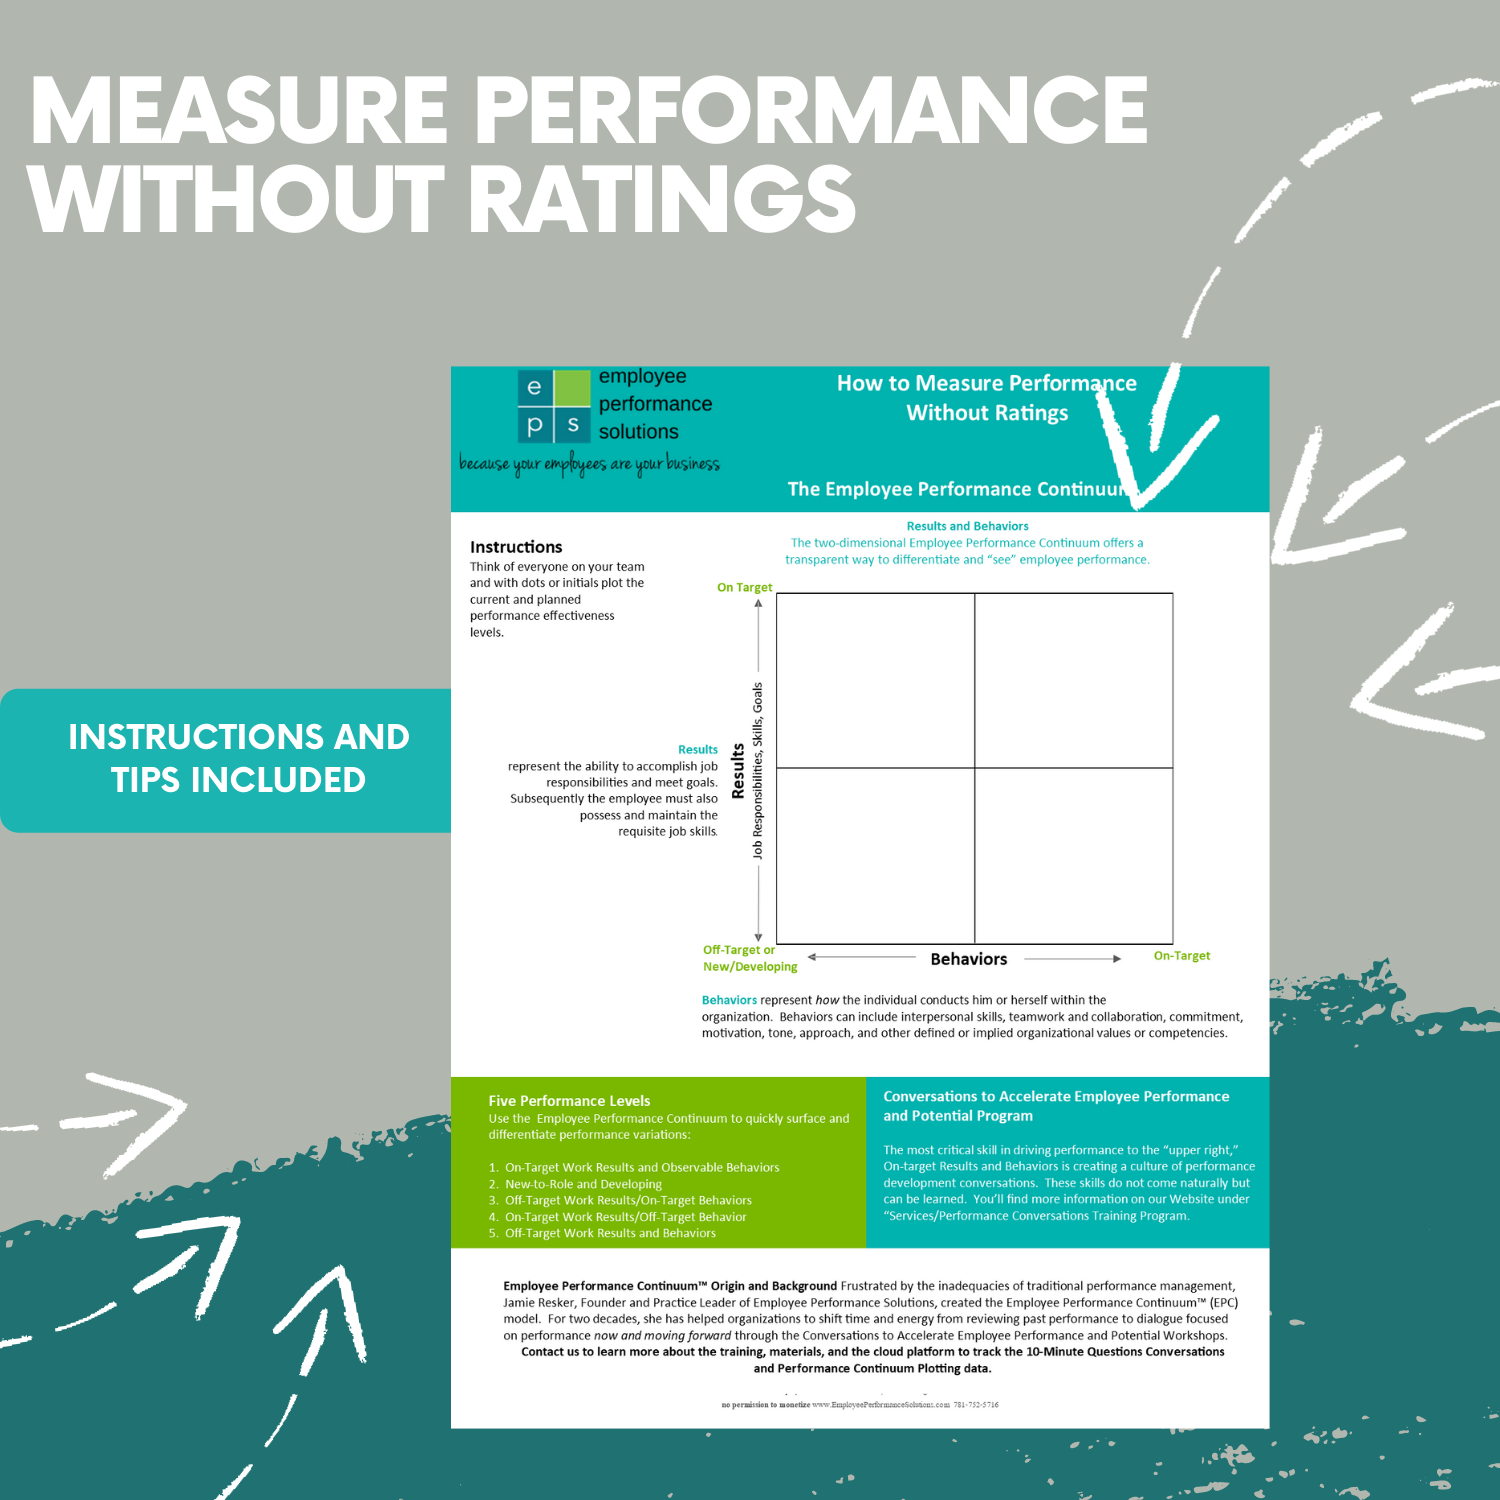 Copy of Measure Performance Without Ratings (1)